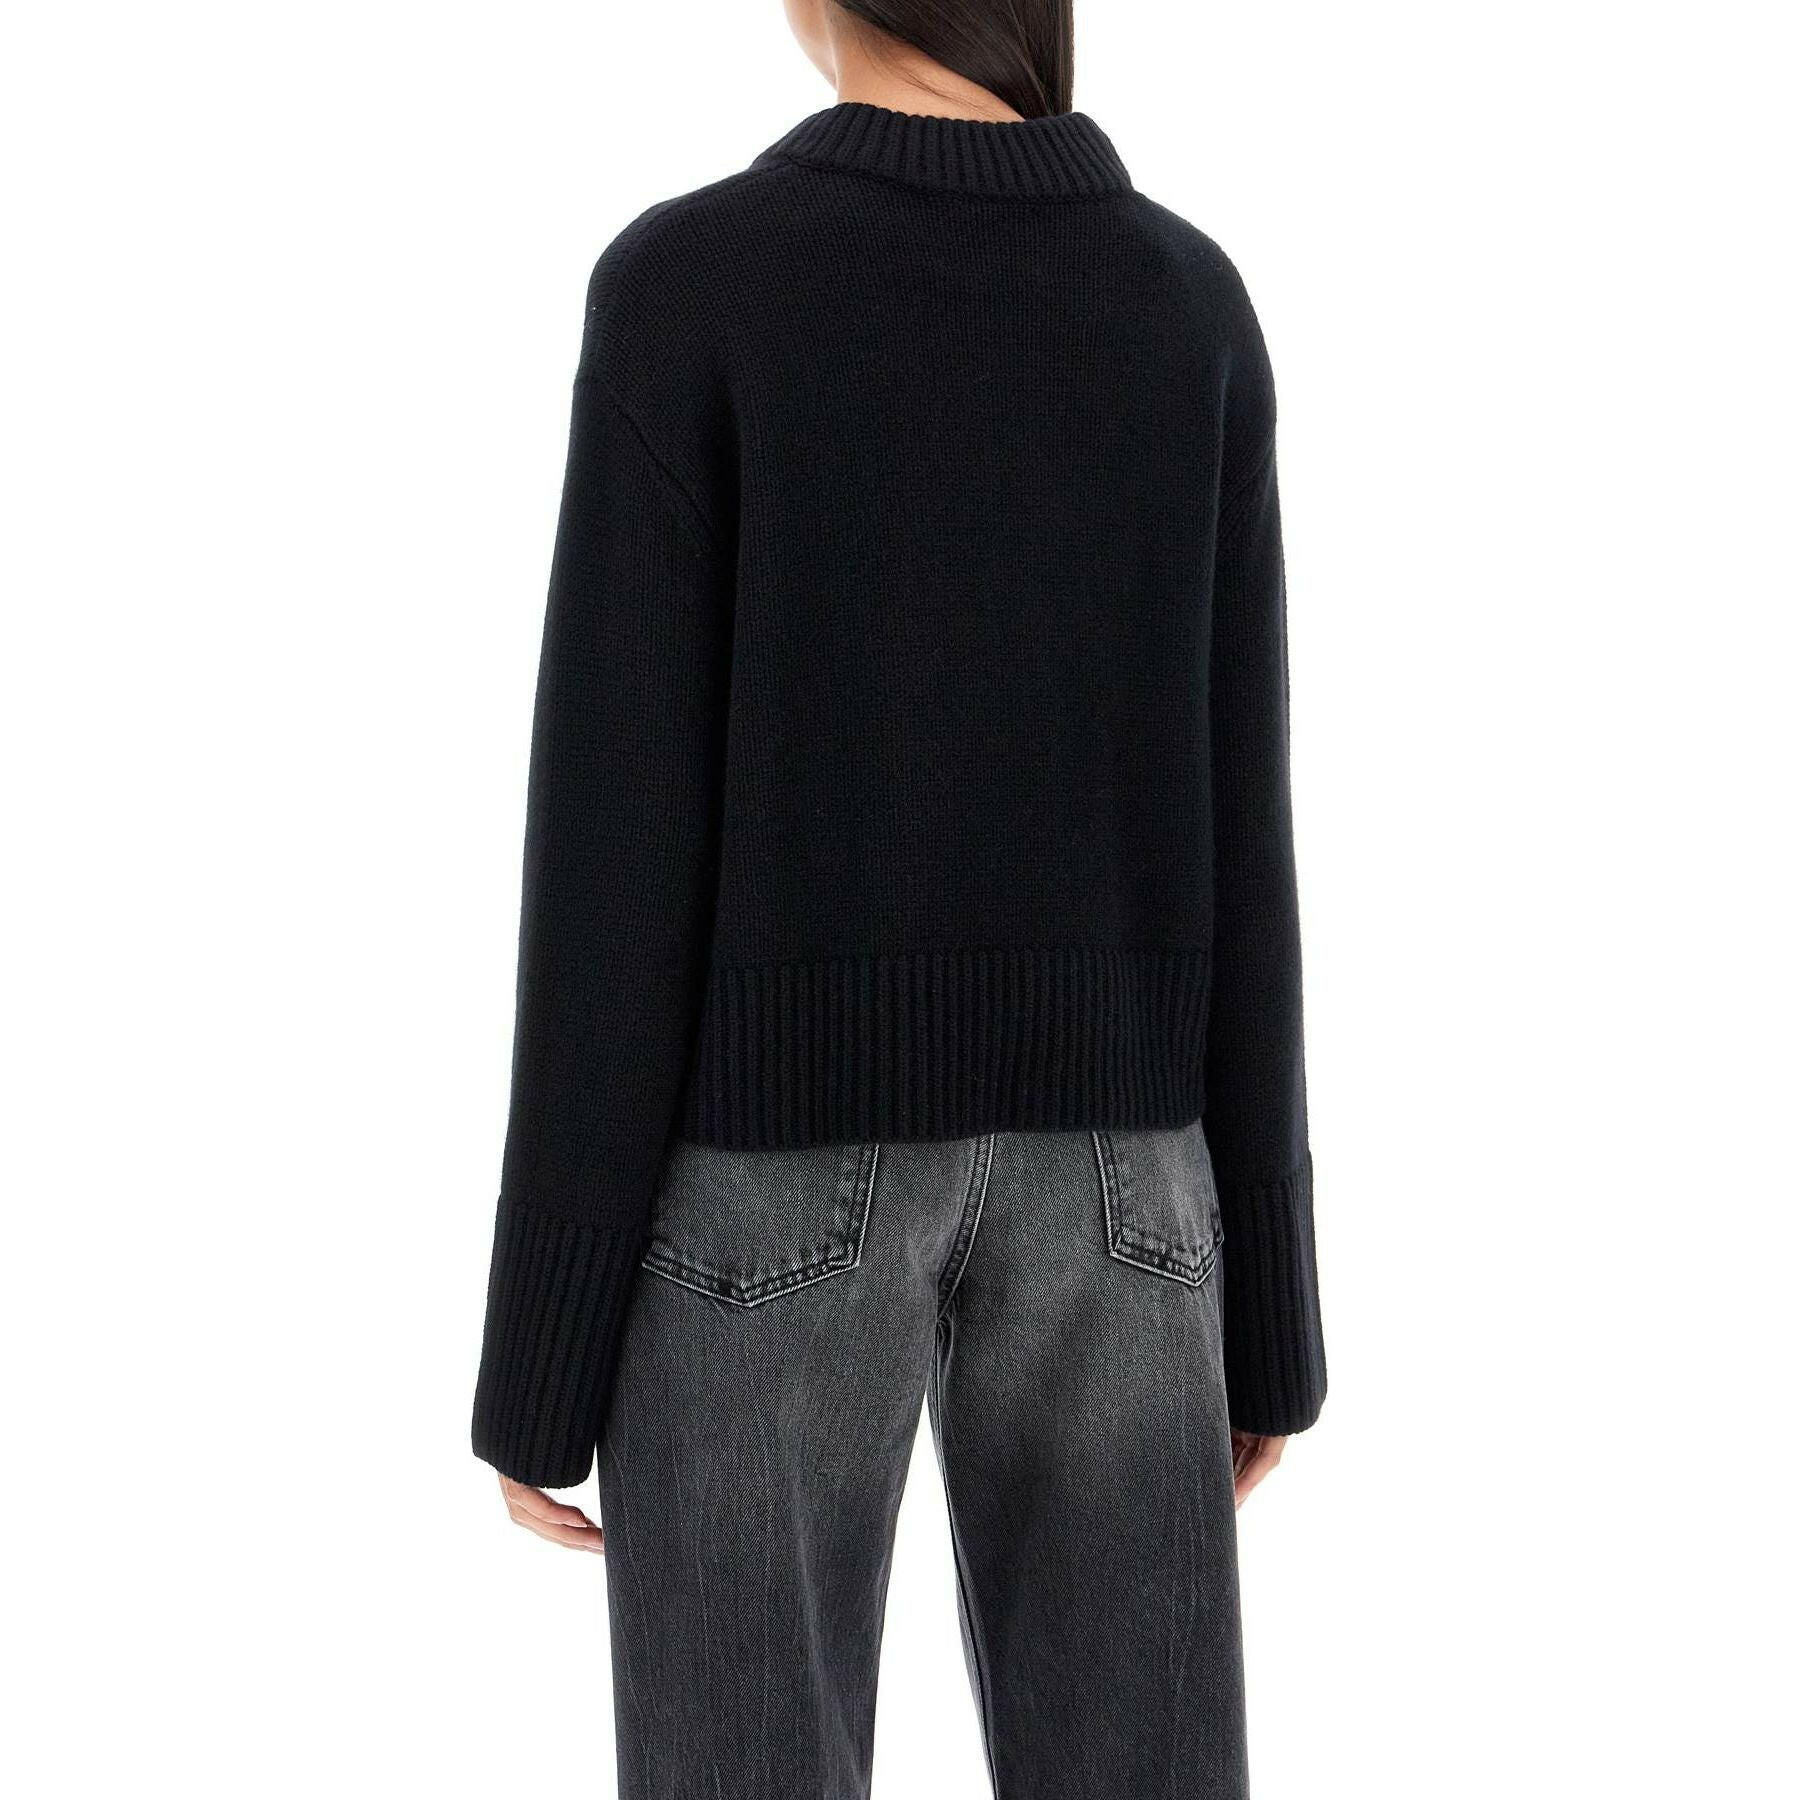 Cashmere Sony Pullover Sweater.